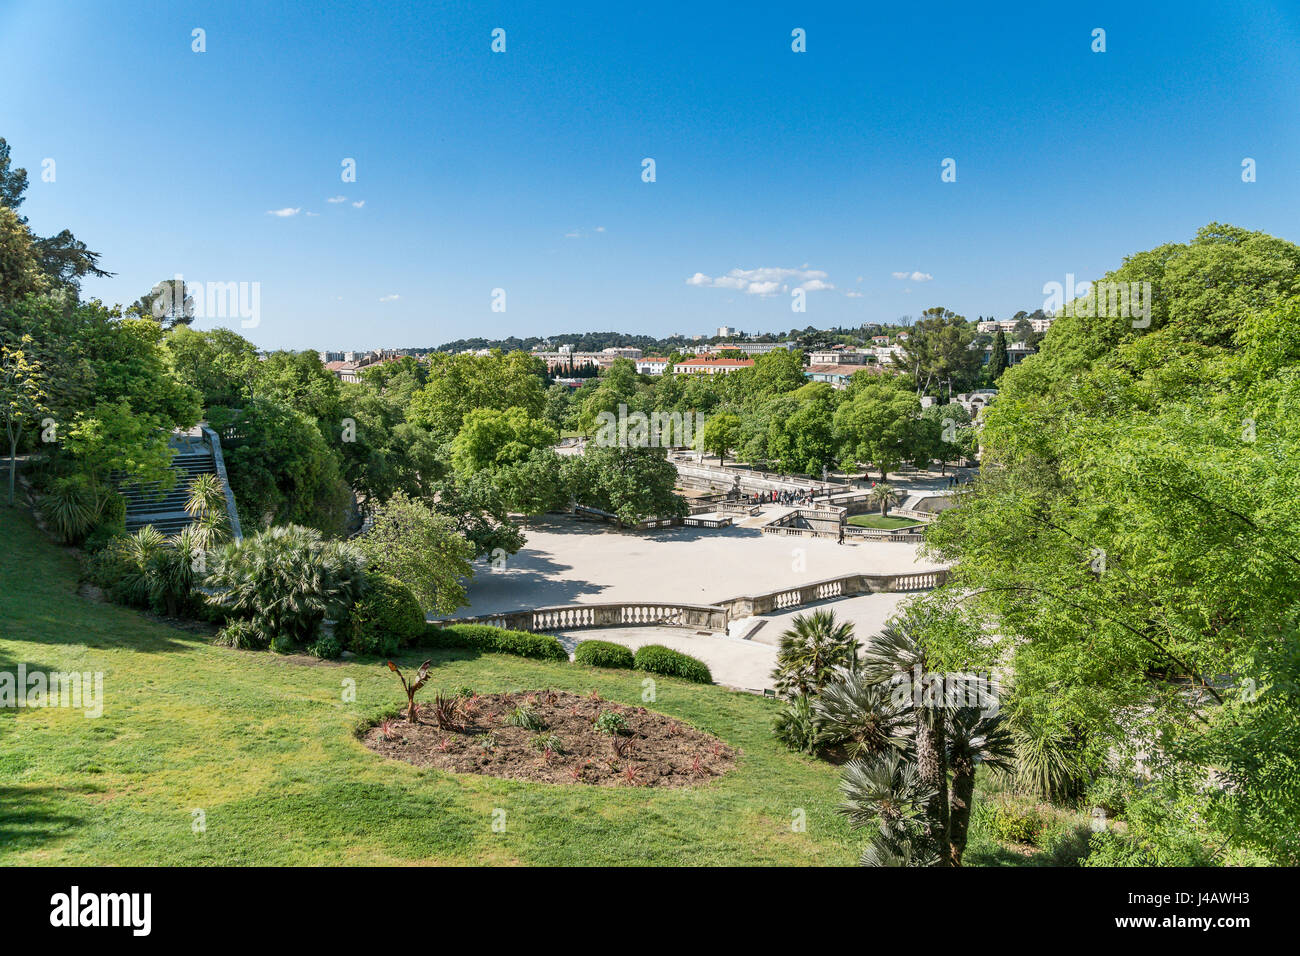 Jardin de la Fontaine, situated in Nimes France Stock Photo